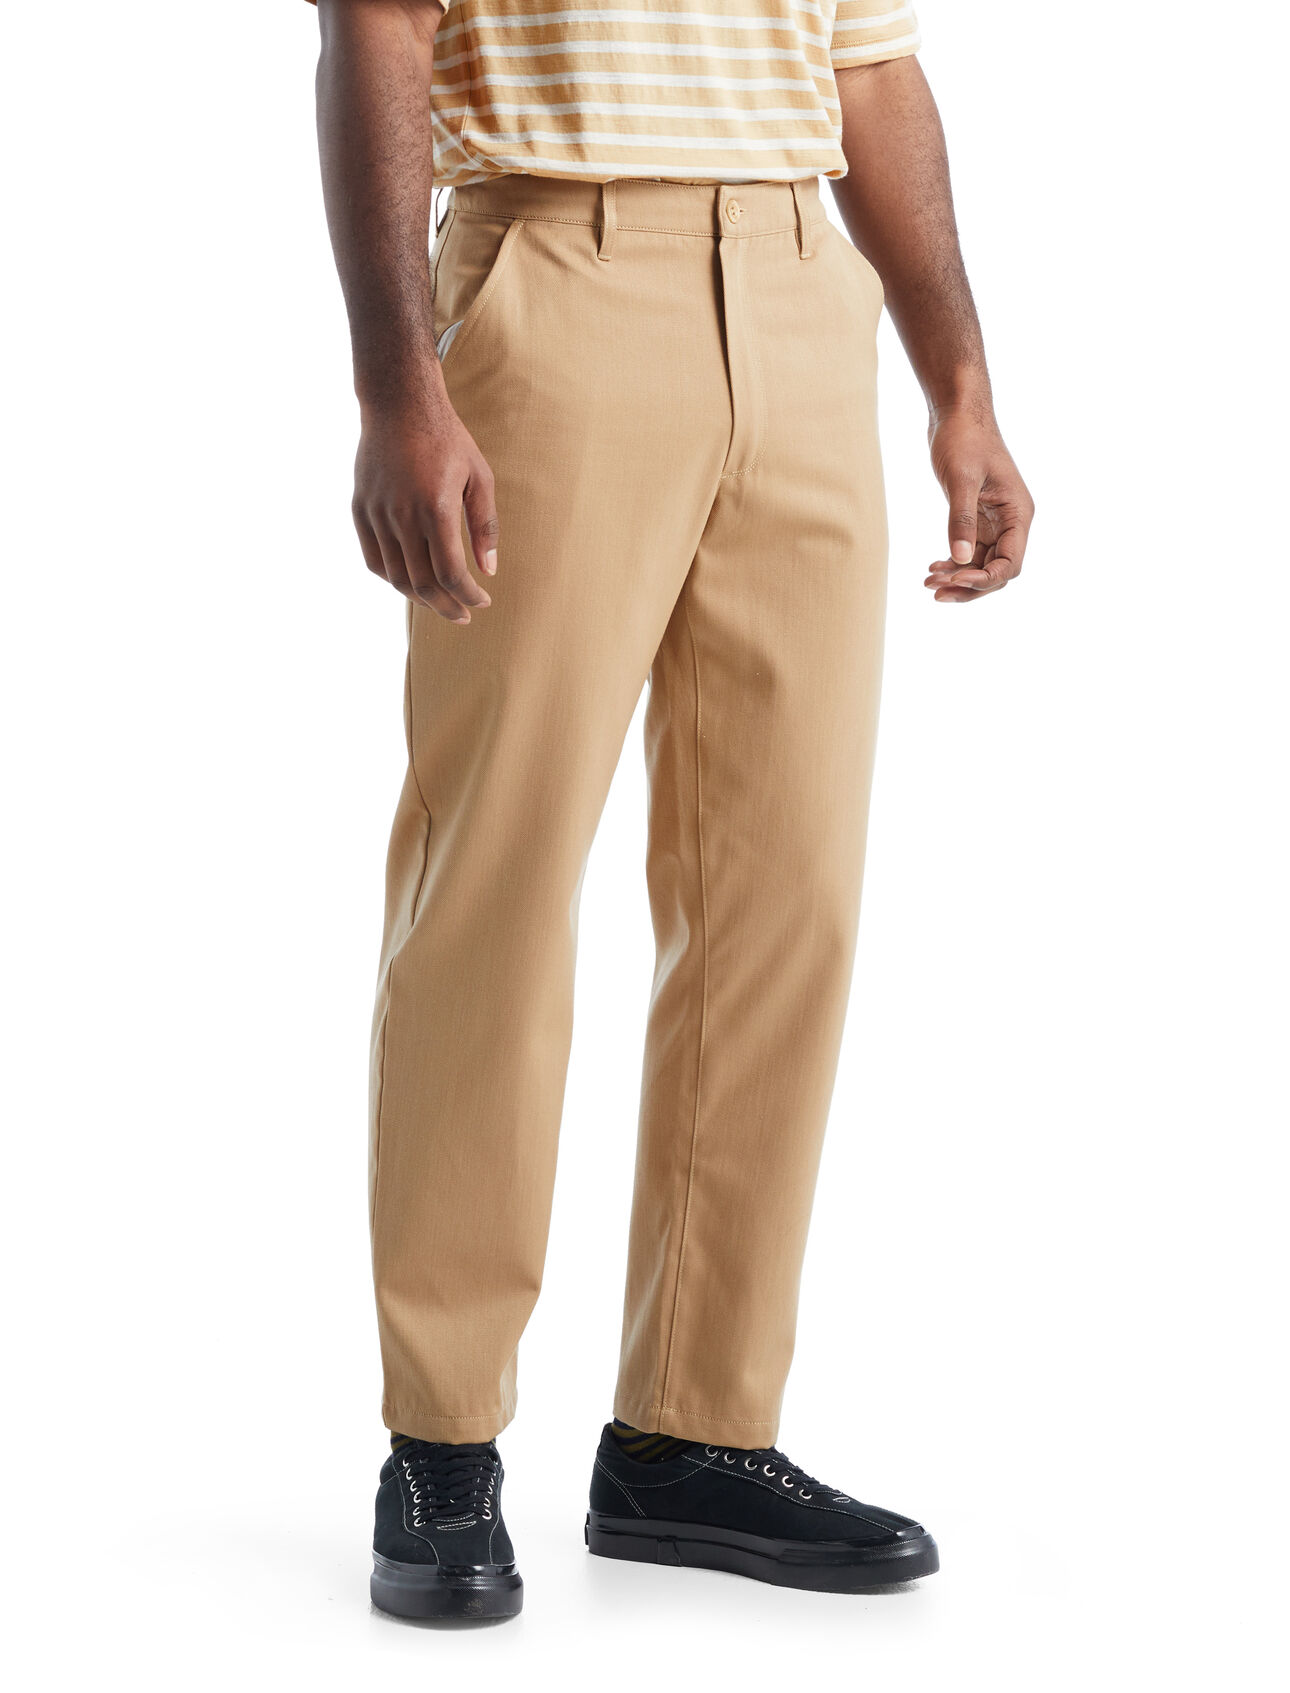 Mens Merino Berlin Pants A classic, versatile chino pant, the Berlin Pants feature a unique  blend of all natural merino wool and organically grown cotton.